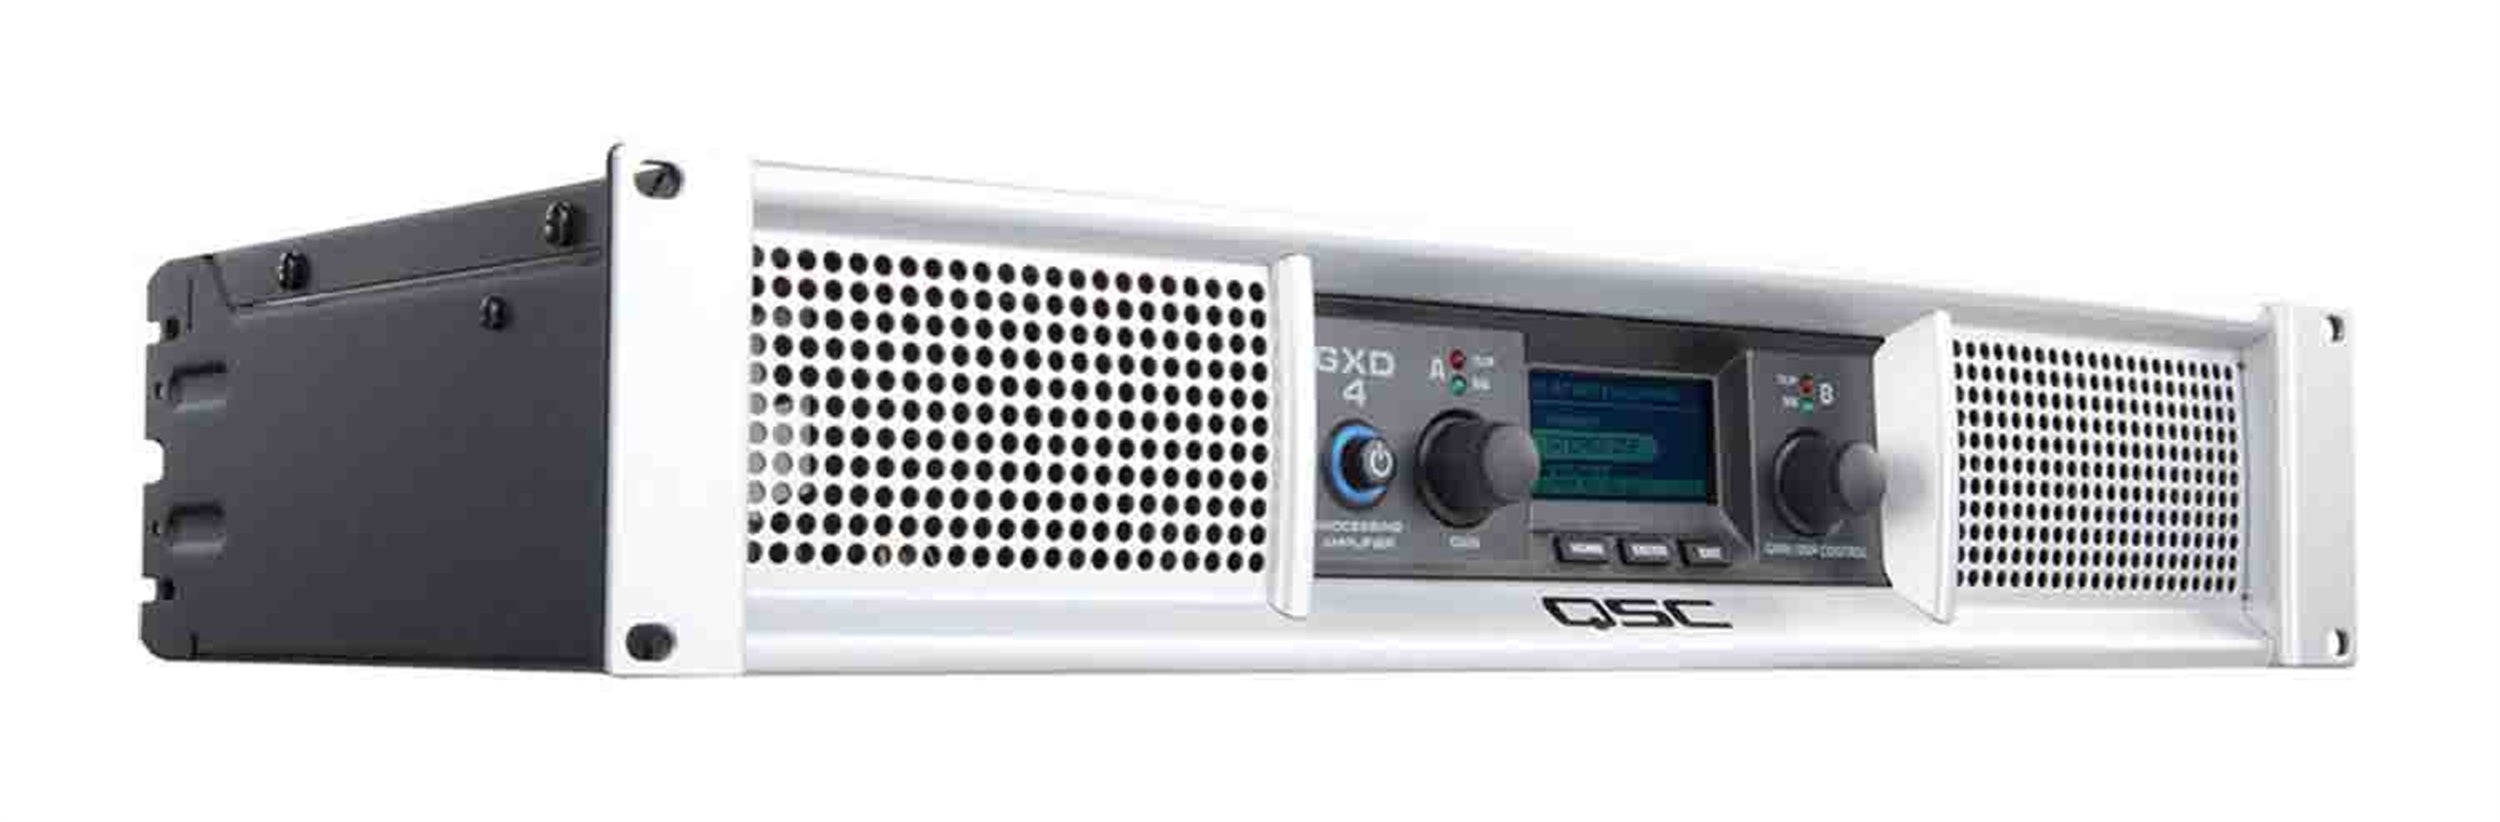 B-Stock: QSC GXD4 Professional 1600W Power Amplifier with DSP - Hollywood DJ